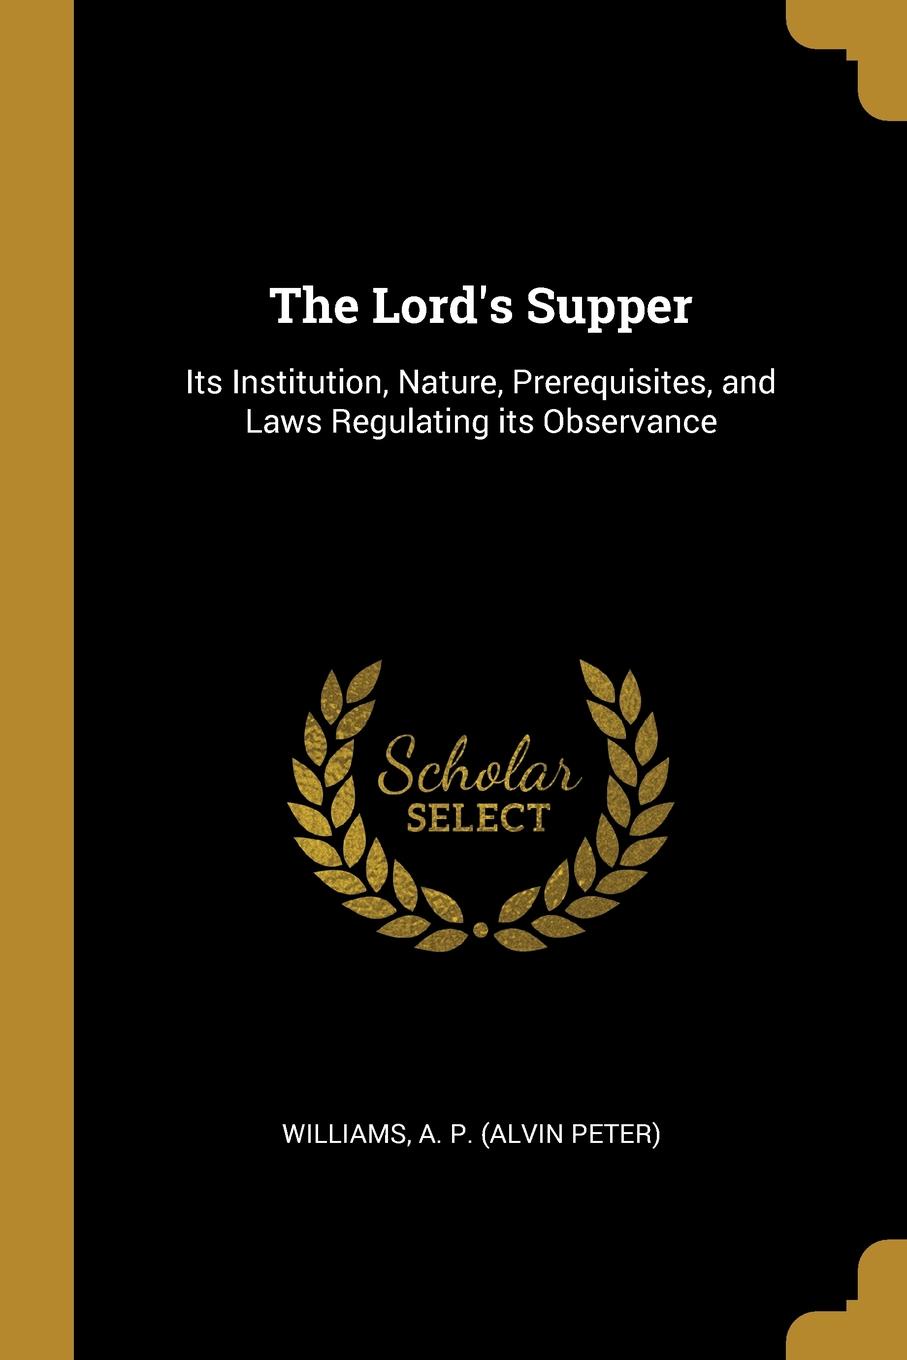 The Lord.s Supper. Its Institution, Nature, Prerequisites, and Laws Regulating its Observance